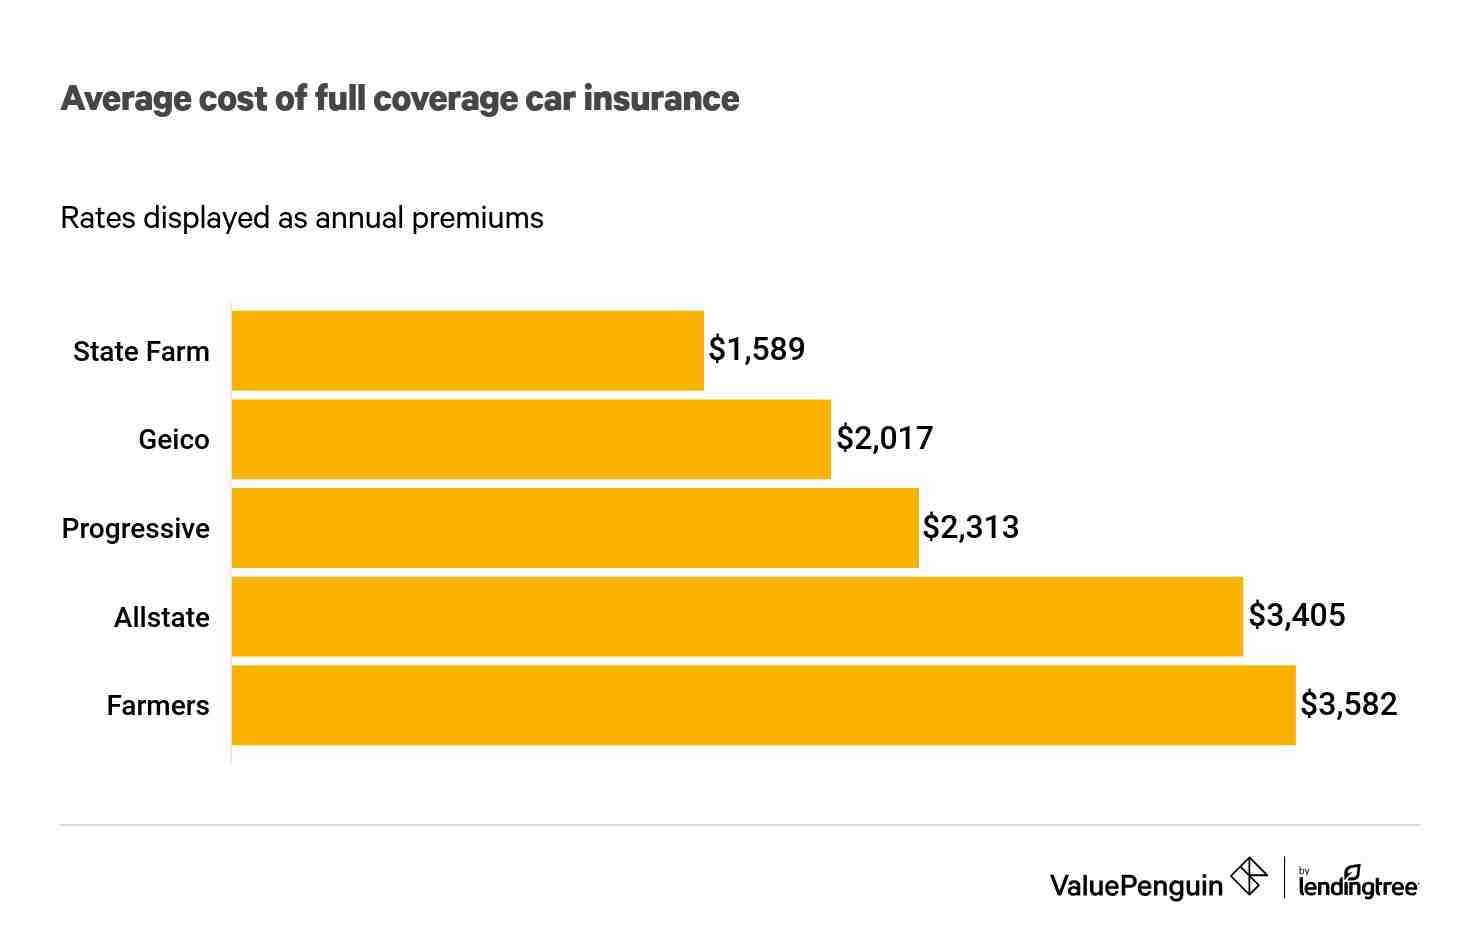 Will insurance premiums increase in 2021?